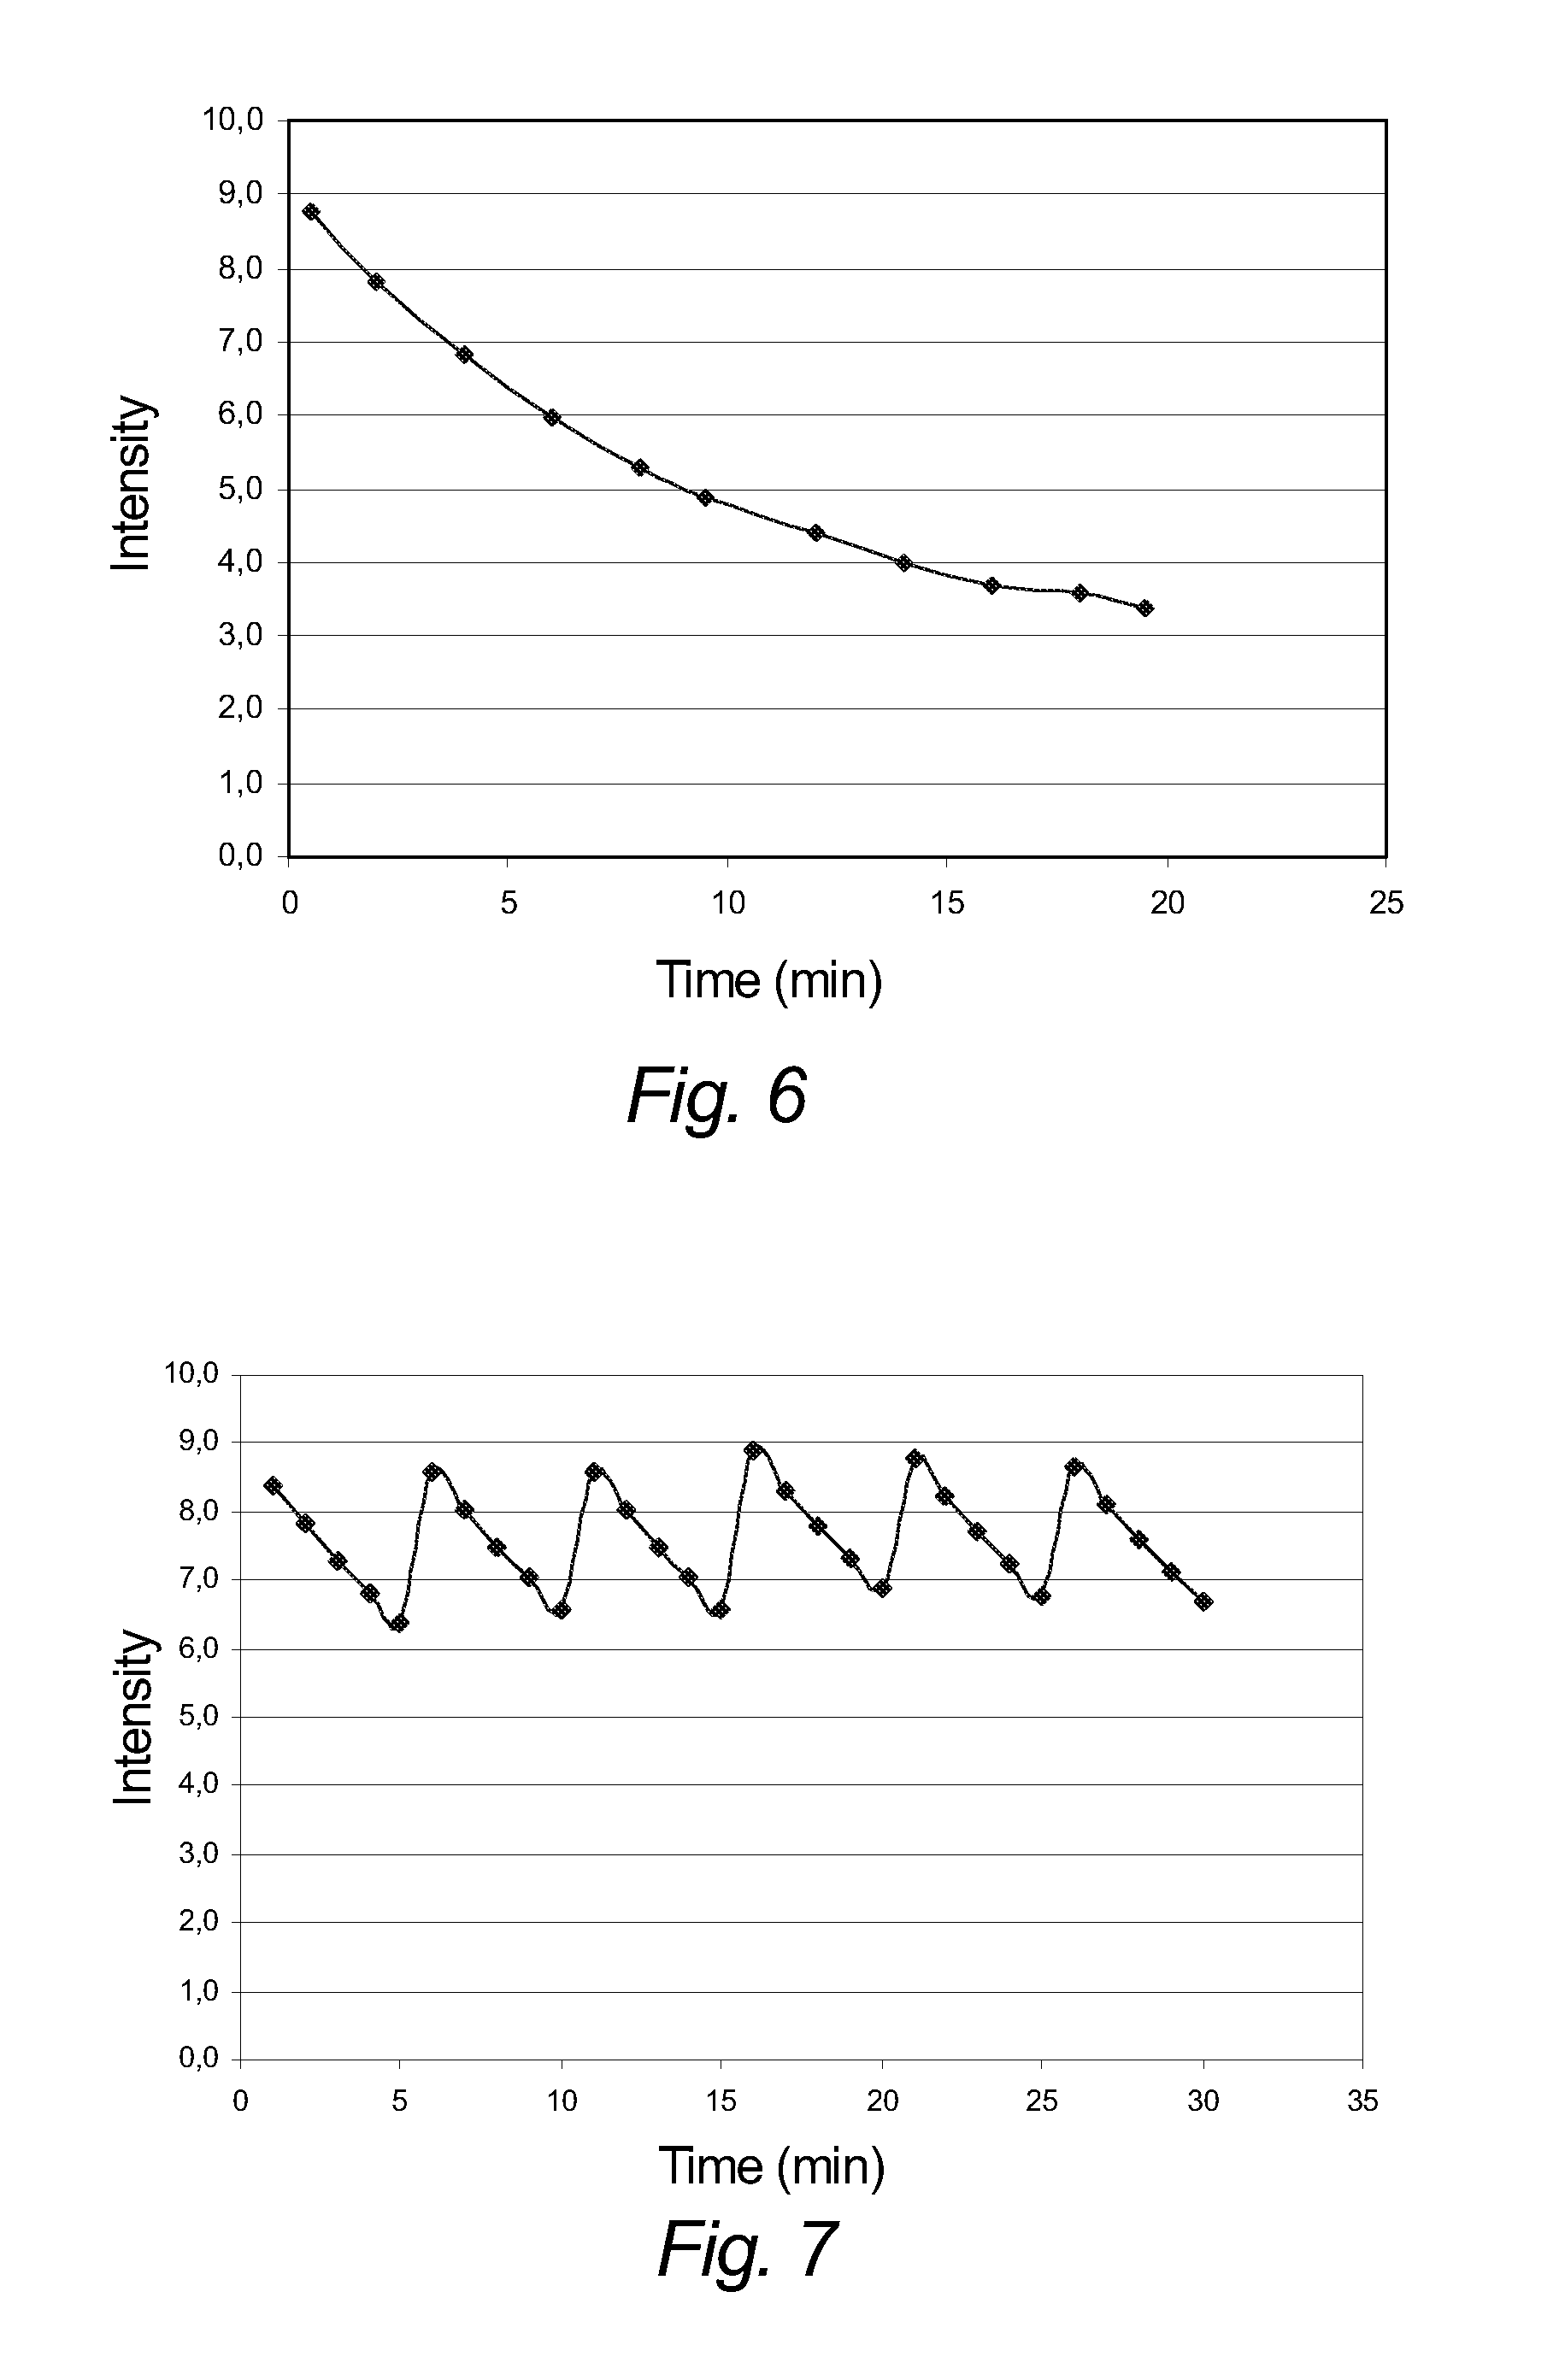 Multi-Part Kit Comprising A Chewing Gum And Further A Flavor Containing Formulation